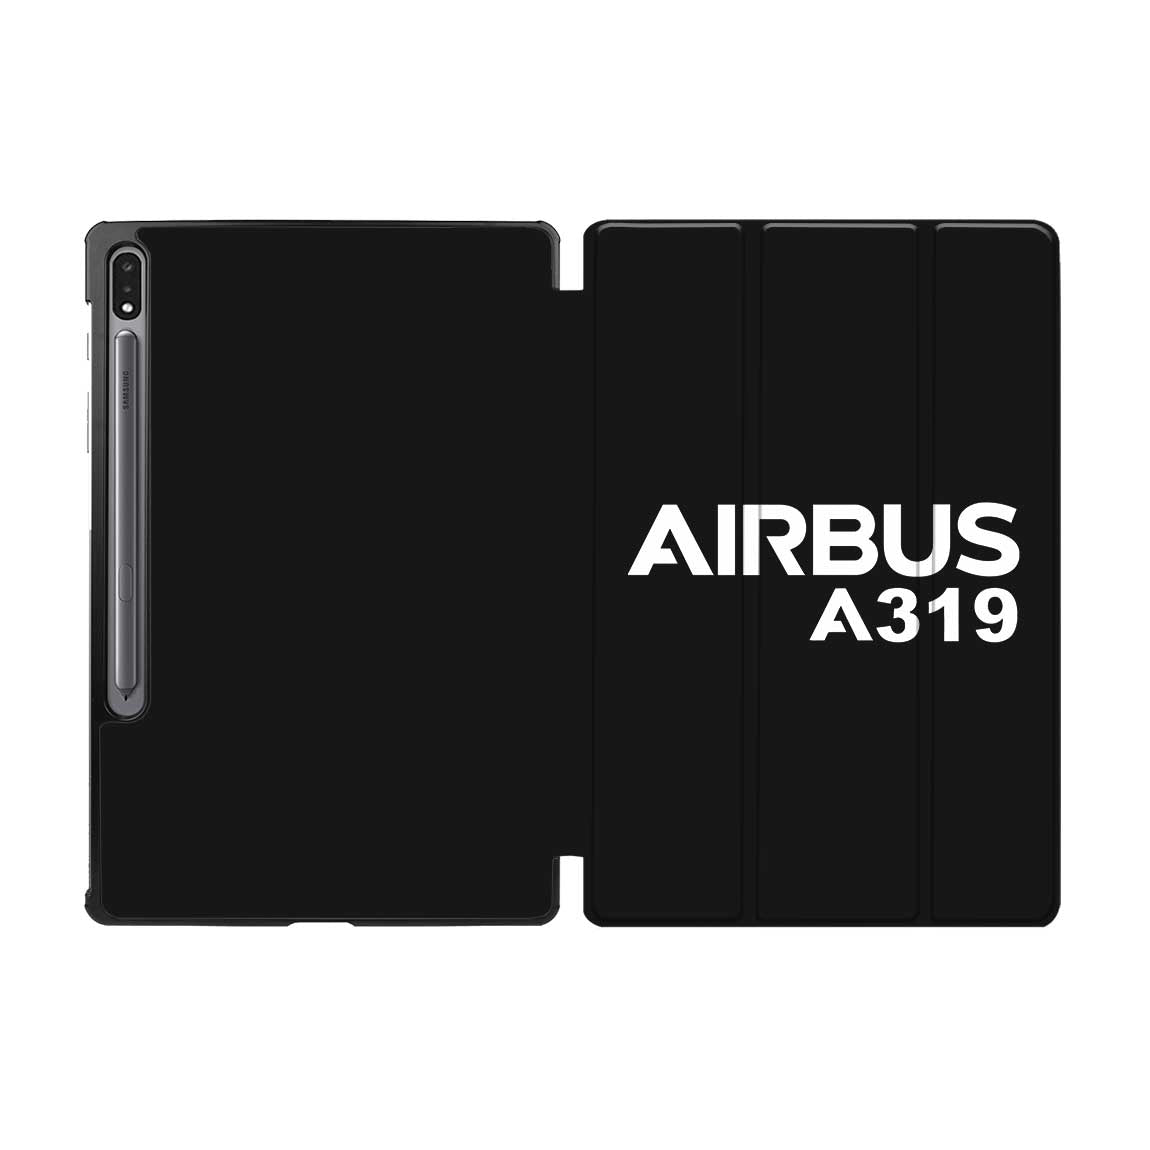 Airbus A319 & Text Designed Samsung Tablet Cases